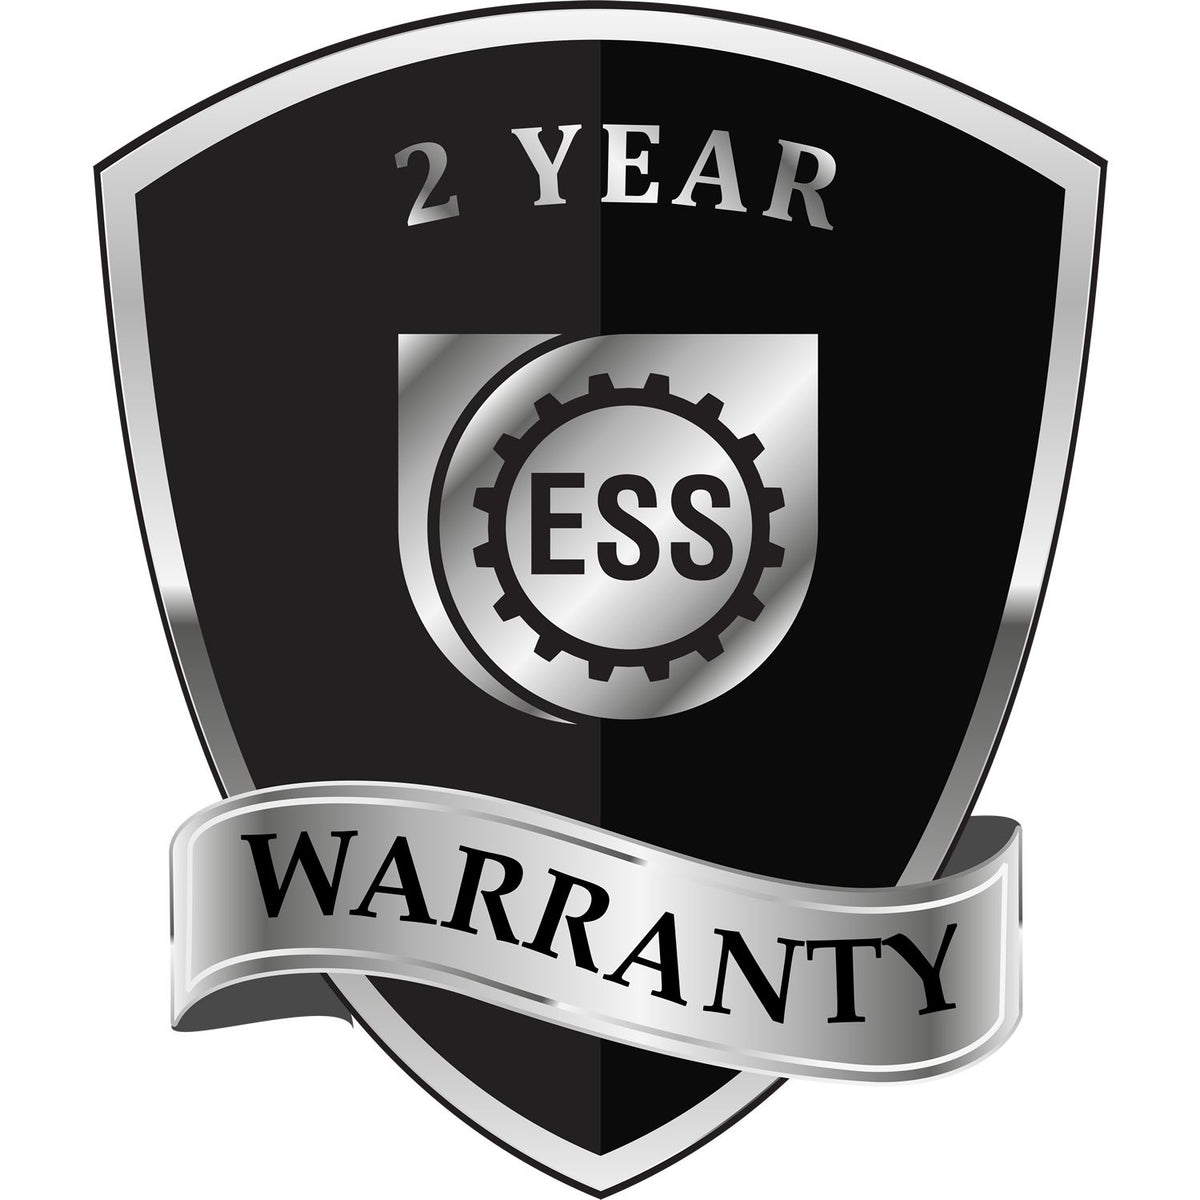 A badge or emblem showing a warranty icon for the State of Utah Extended Long Reach Engineer Seal